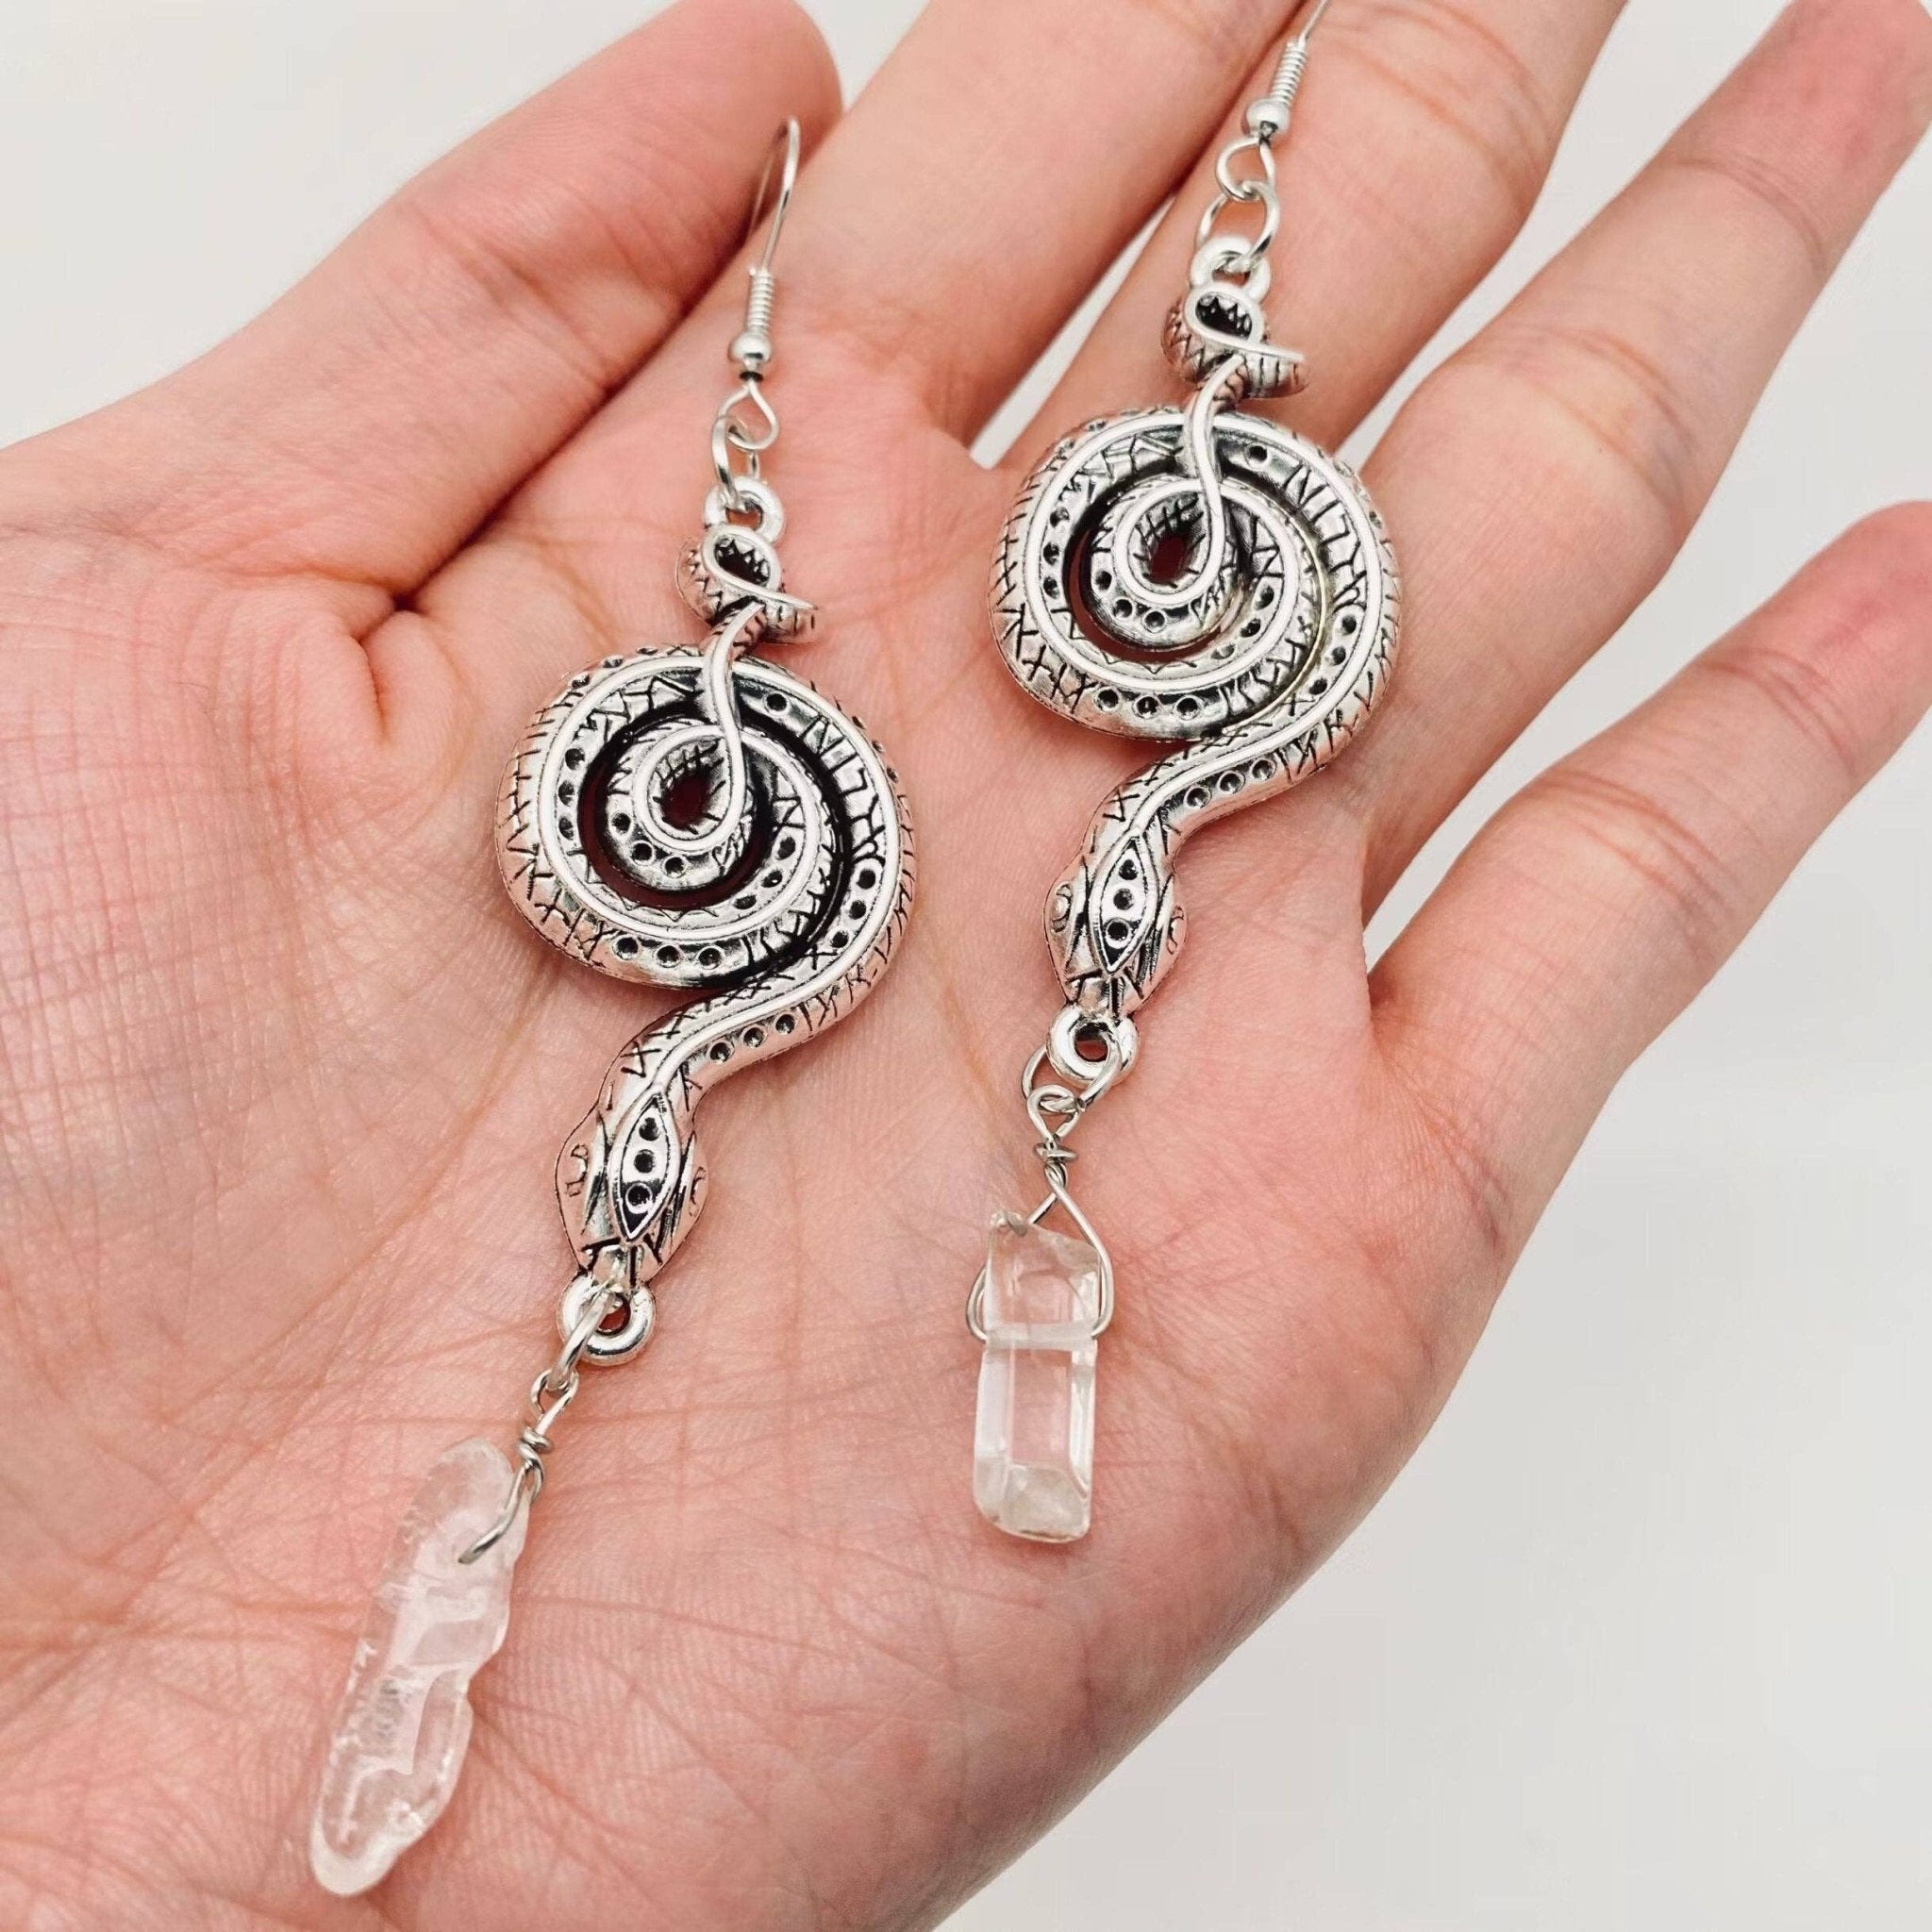 Gothic Vintage Snake Crystal Earrings - Spiral Circle